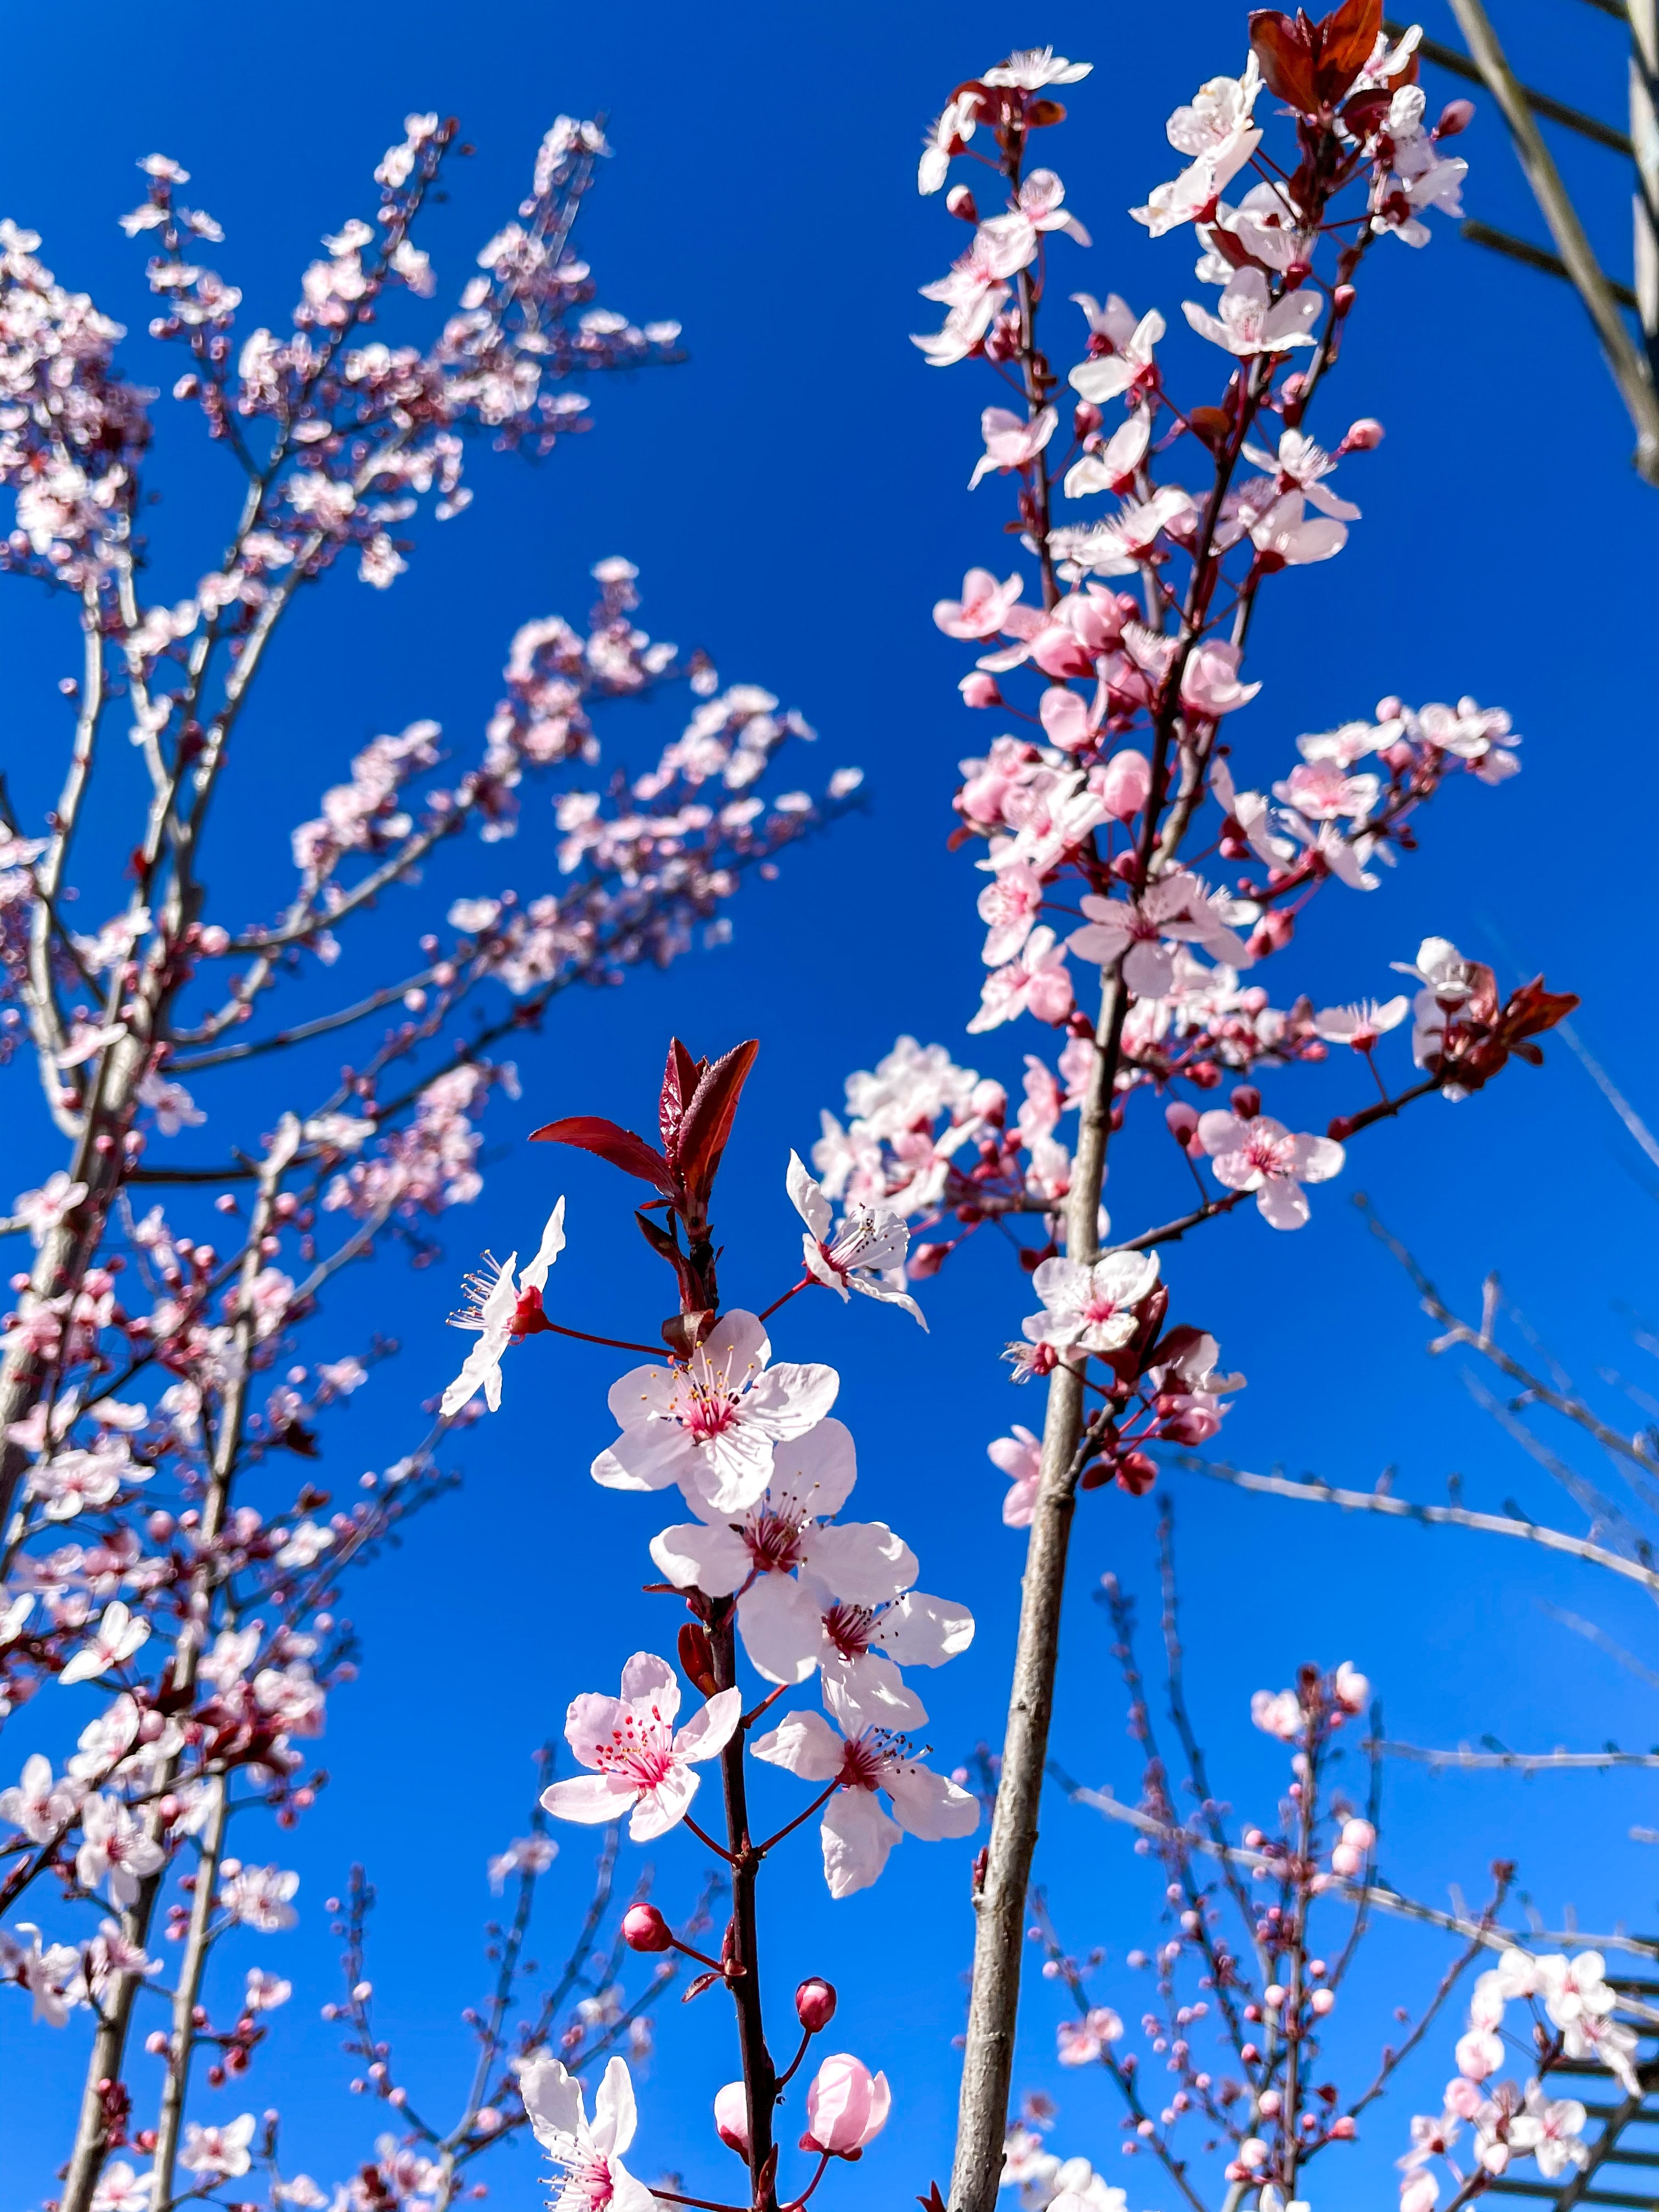 Best Cherry Blossom Background for mobile